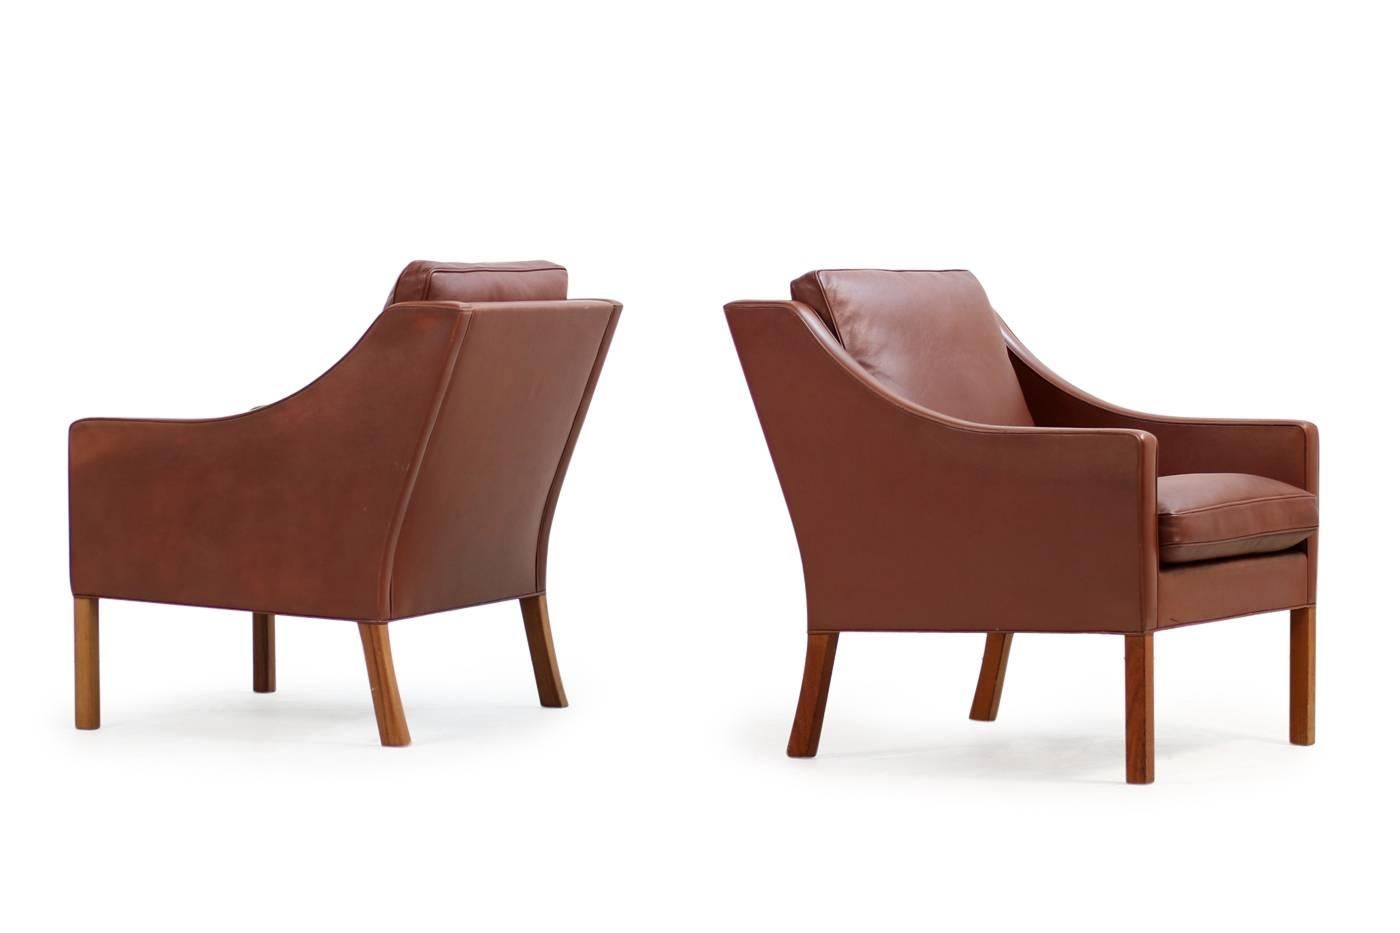 Beautiful pair of Borge Mogensen 2207 easy lounge chairs, cognac/brown leather, fantastic condition, cushions were reupholstered for more comfort, teak legs, a matching Mogensen 2209 Sofa is available, please visit our 1stdibs storefront.